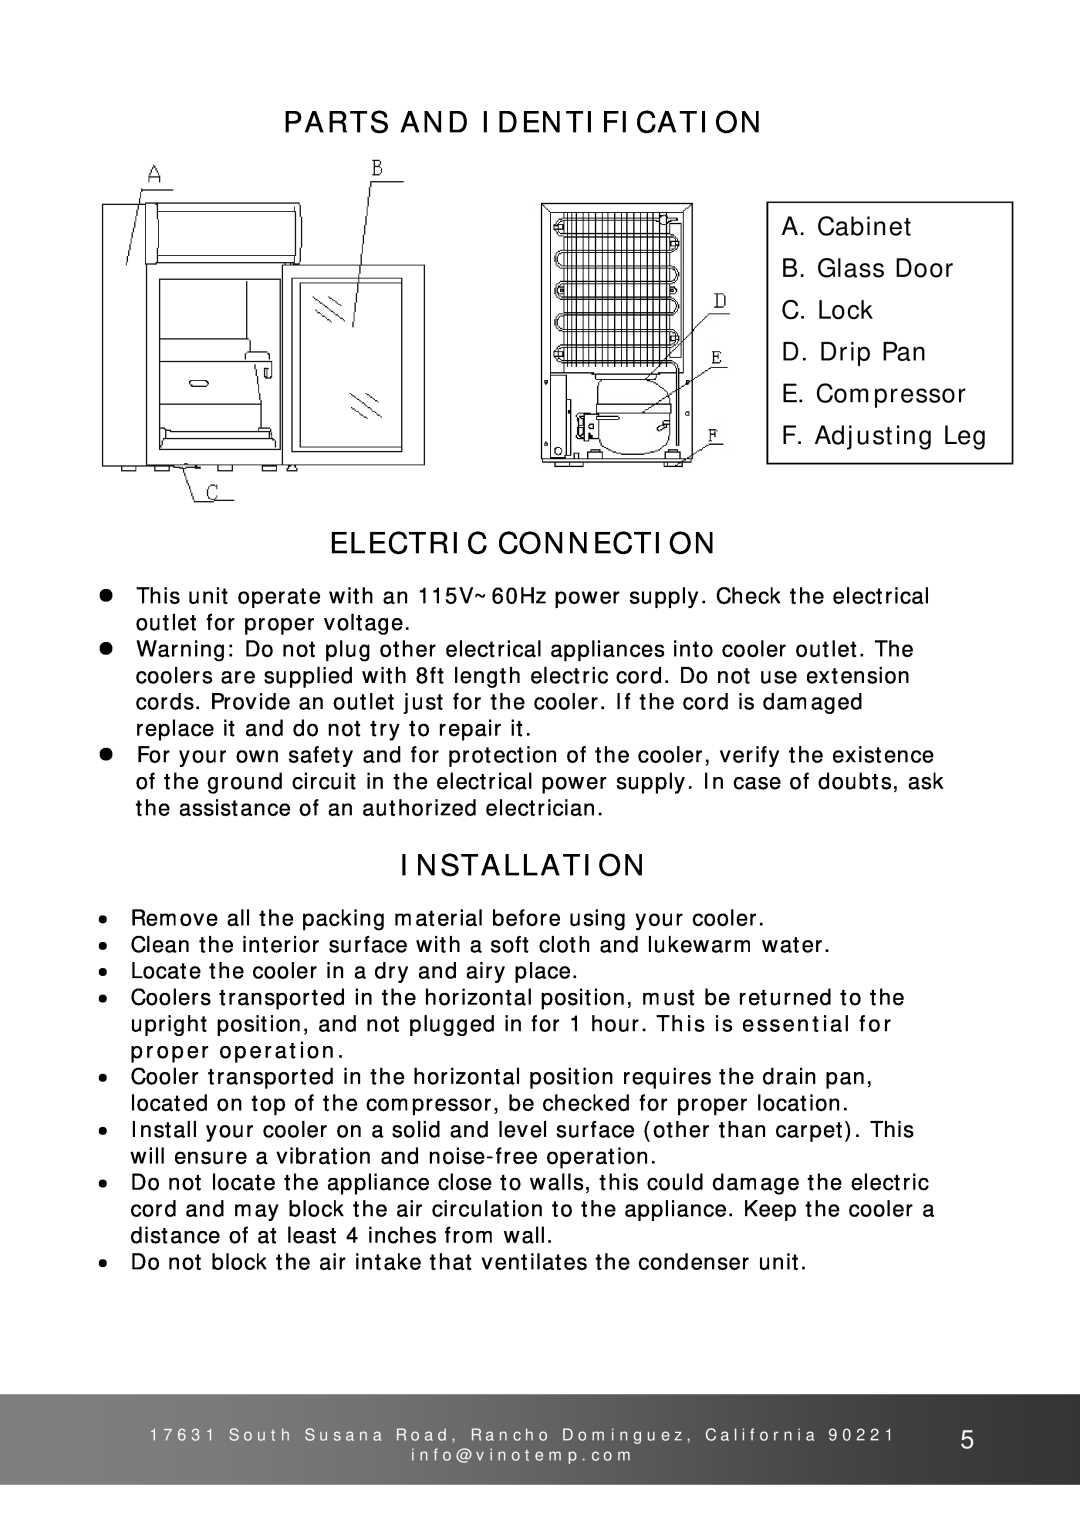 Vinotemp VT-BC-1 Parts And Identification, Electric Connection, Installation, A. Cabinet B. Glass Door C. Lock D. Drip Pan 